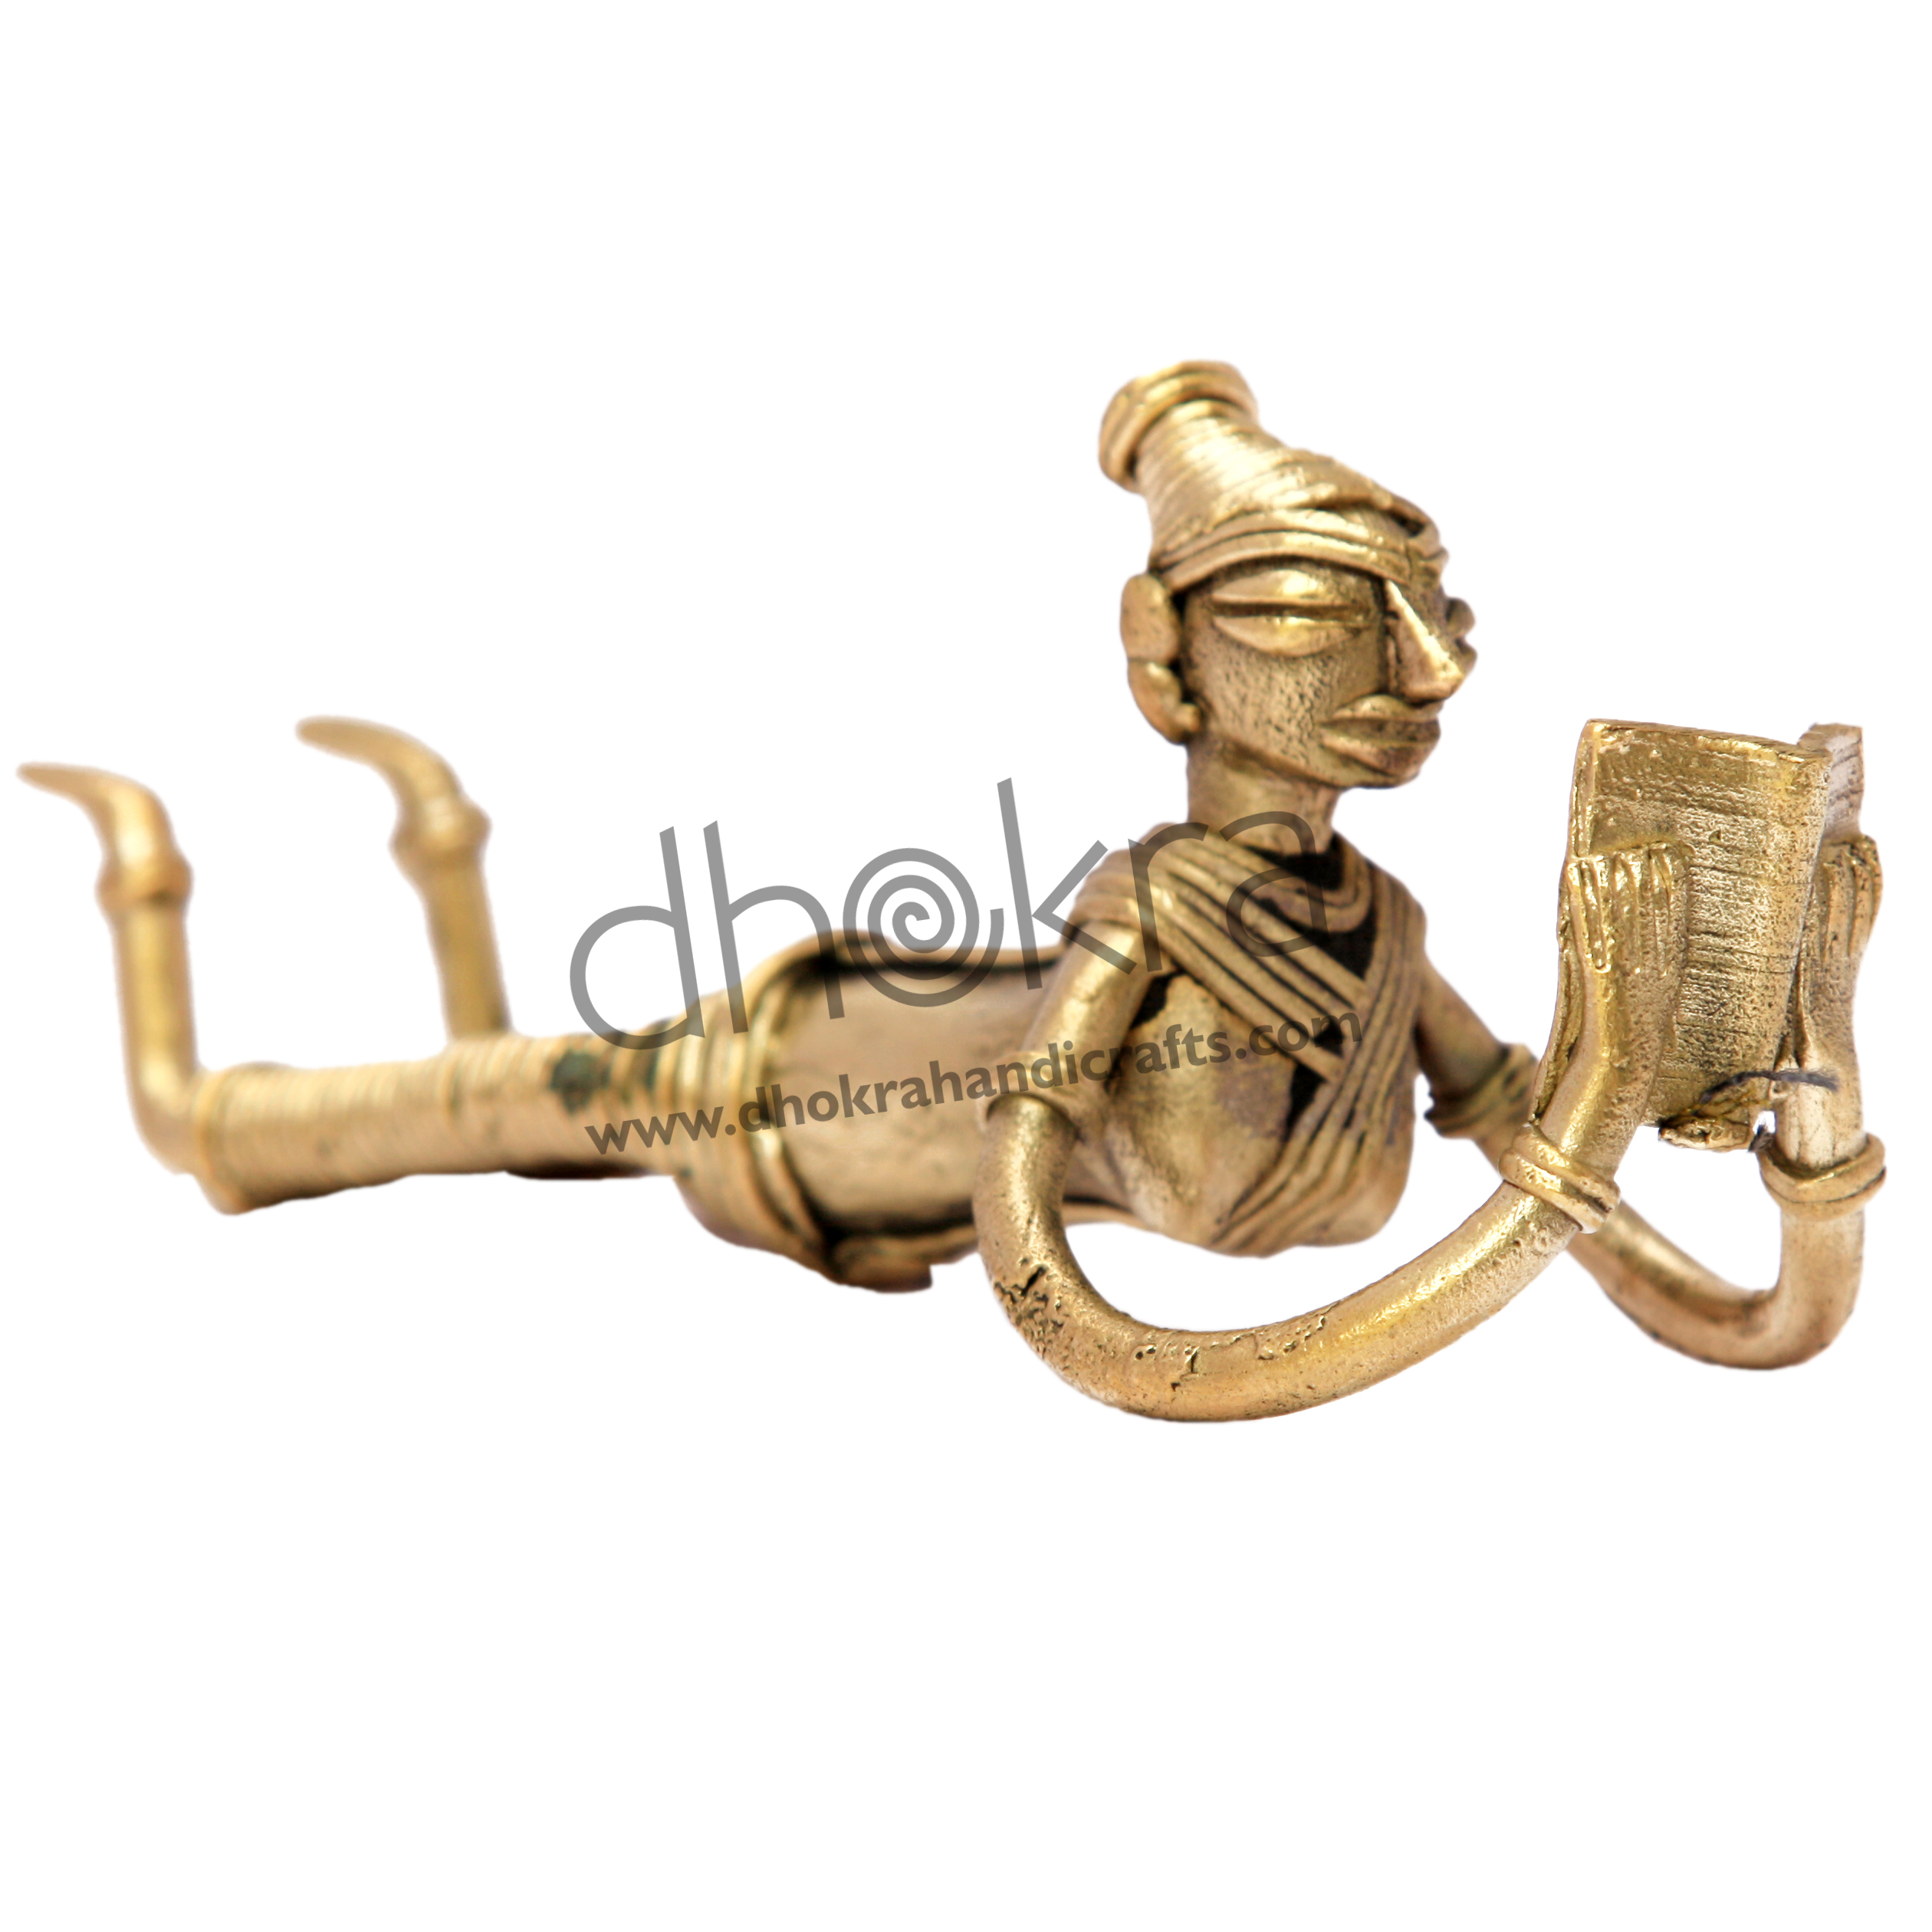 Exquisite Dhokra Jewellery Designs: A Must-Have for every Woman